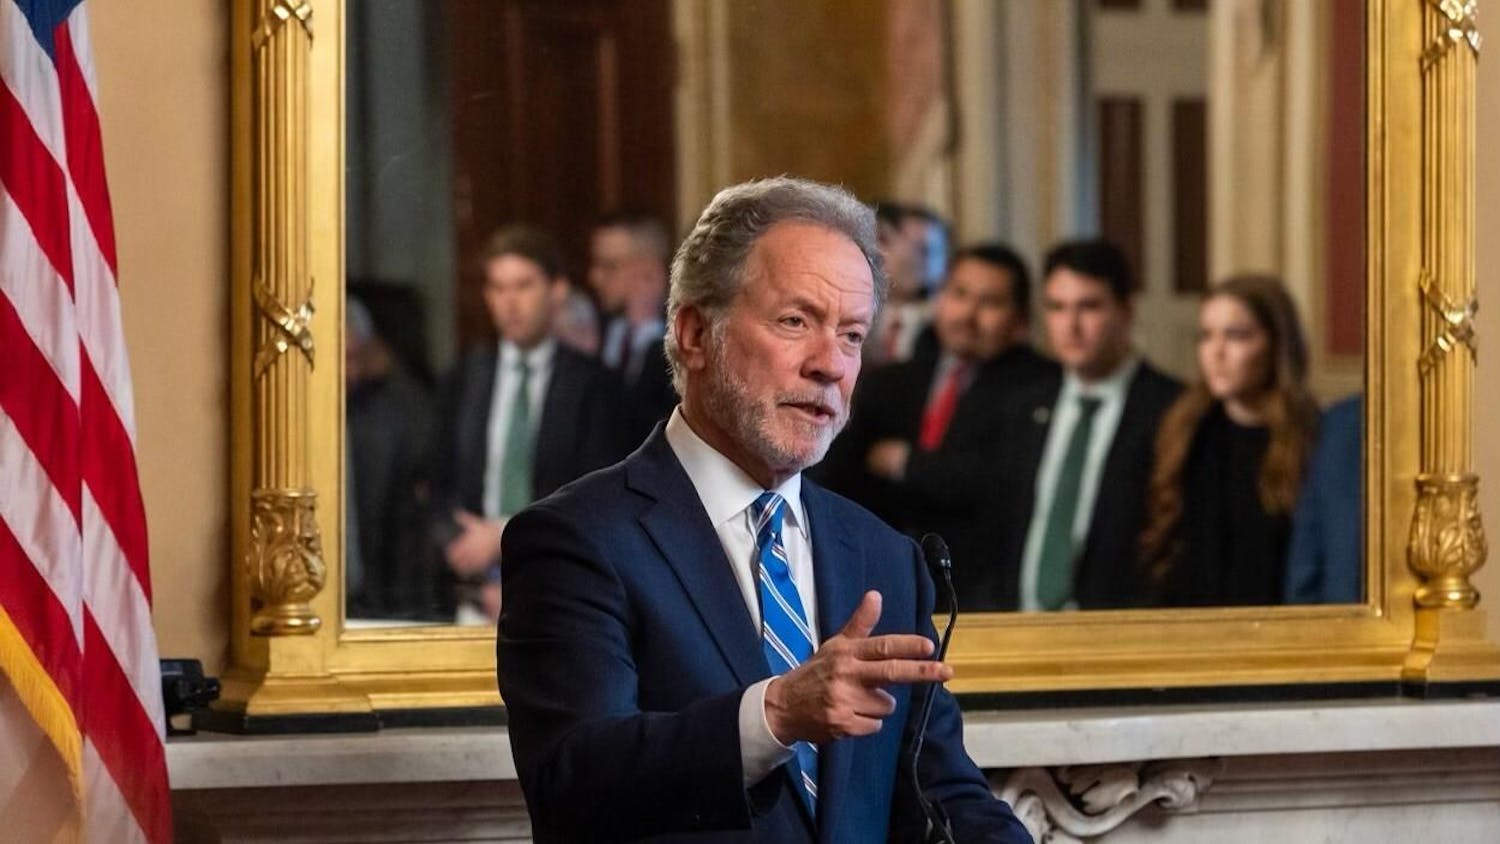 Former South Carolina Gov. David Beasley at the South Carolina Statehouse in Columbia, South Carolina. Beasley joined the USC Joseph F. Rice School of Law on March 1 as a faculty professor in the Department of Legal Studies.